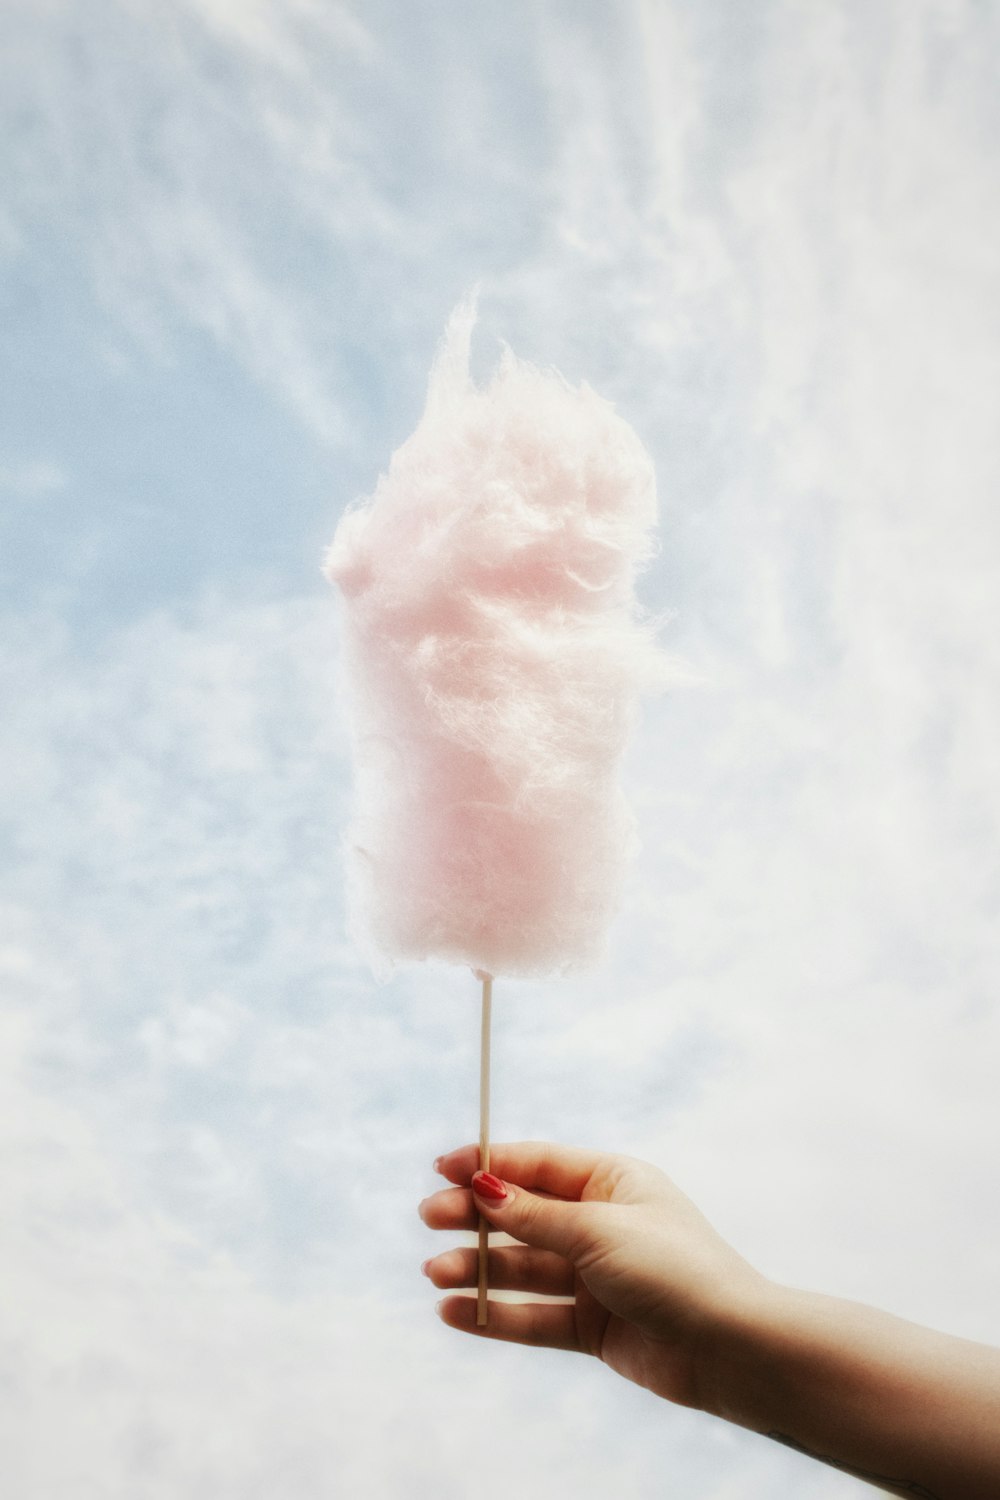 a hand holding a pink cotton candy on a stick